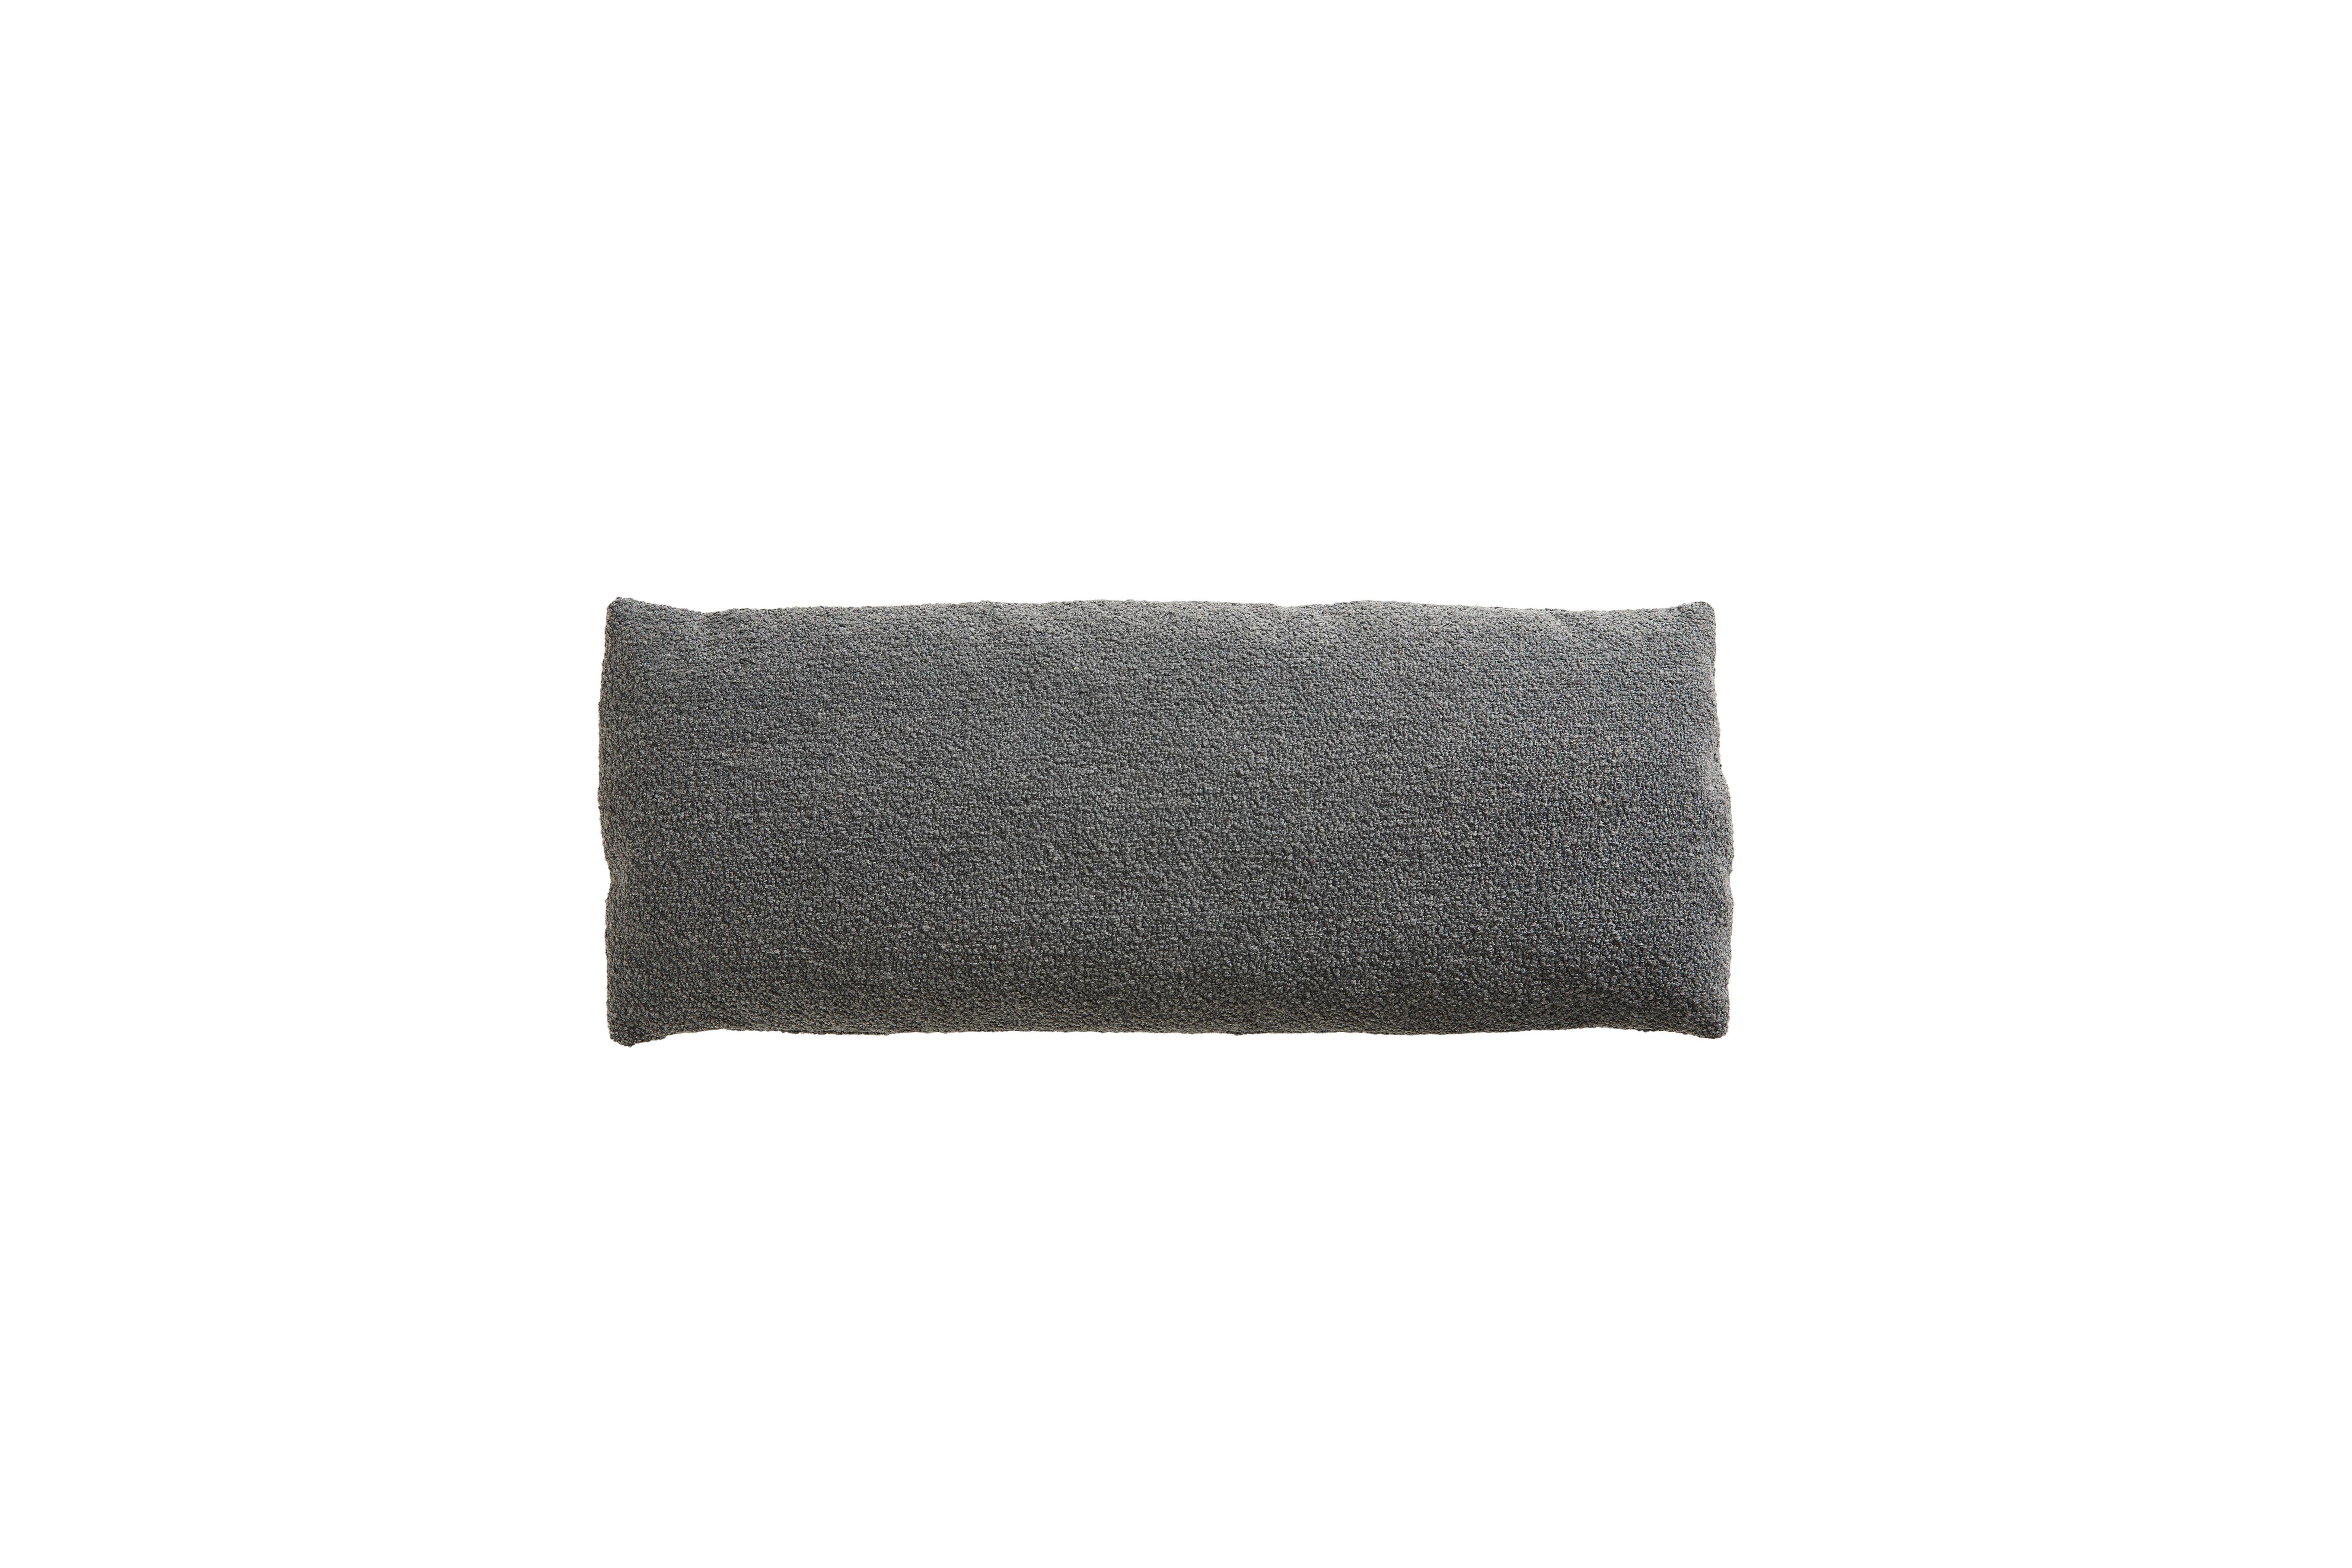 Post-Modern Set of 2 Dark Brown / Grey Level Pillows by Msds Studio For Sale